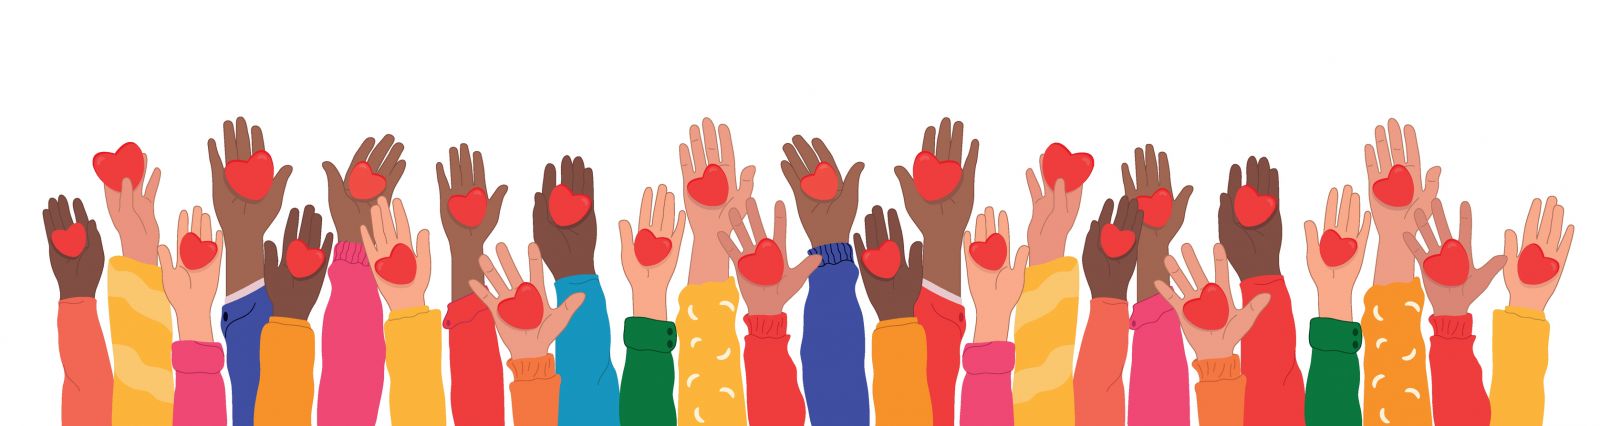 Illustration of group of raised hands with hearts in the palms banner image